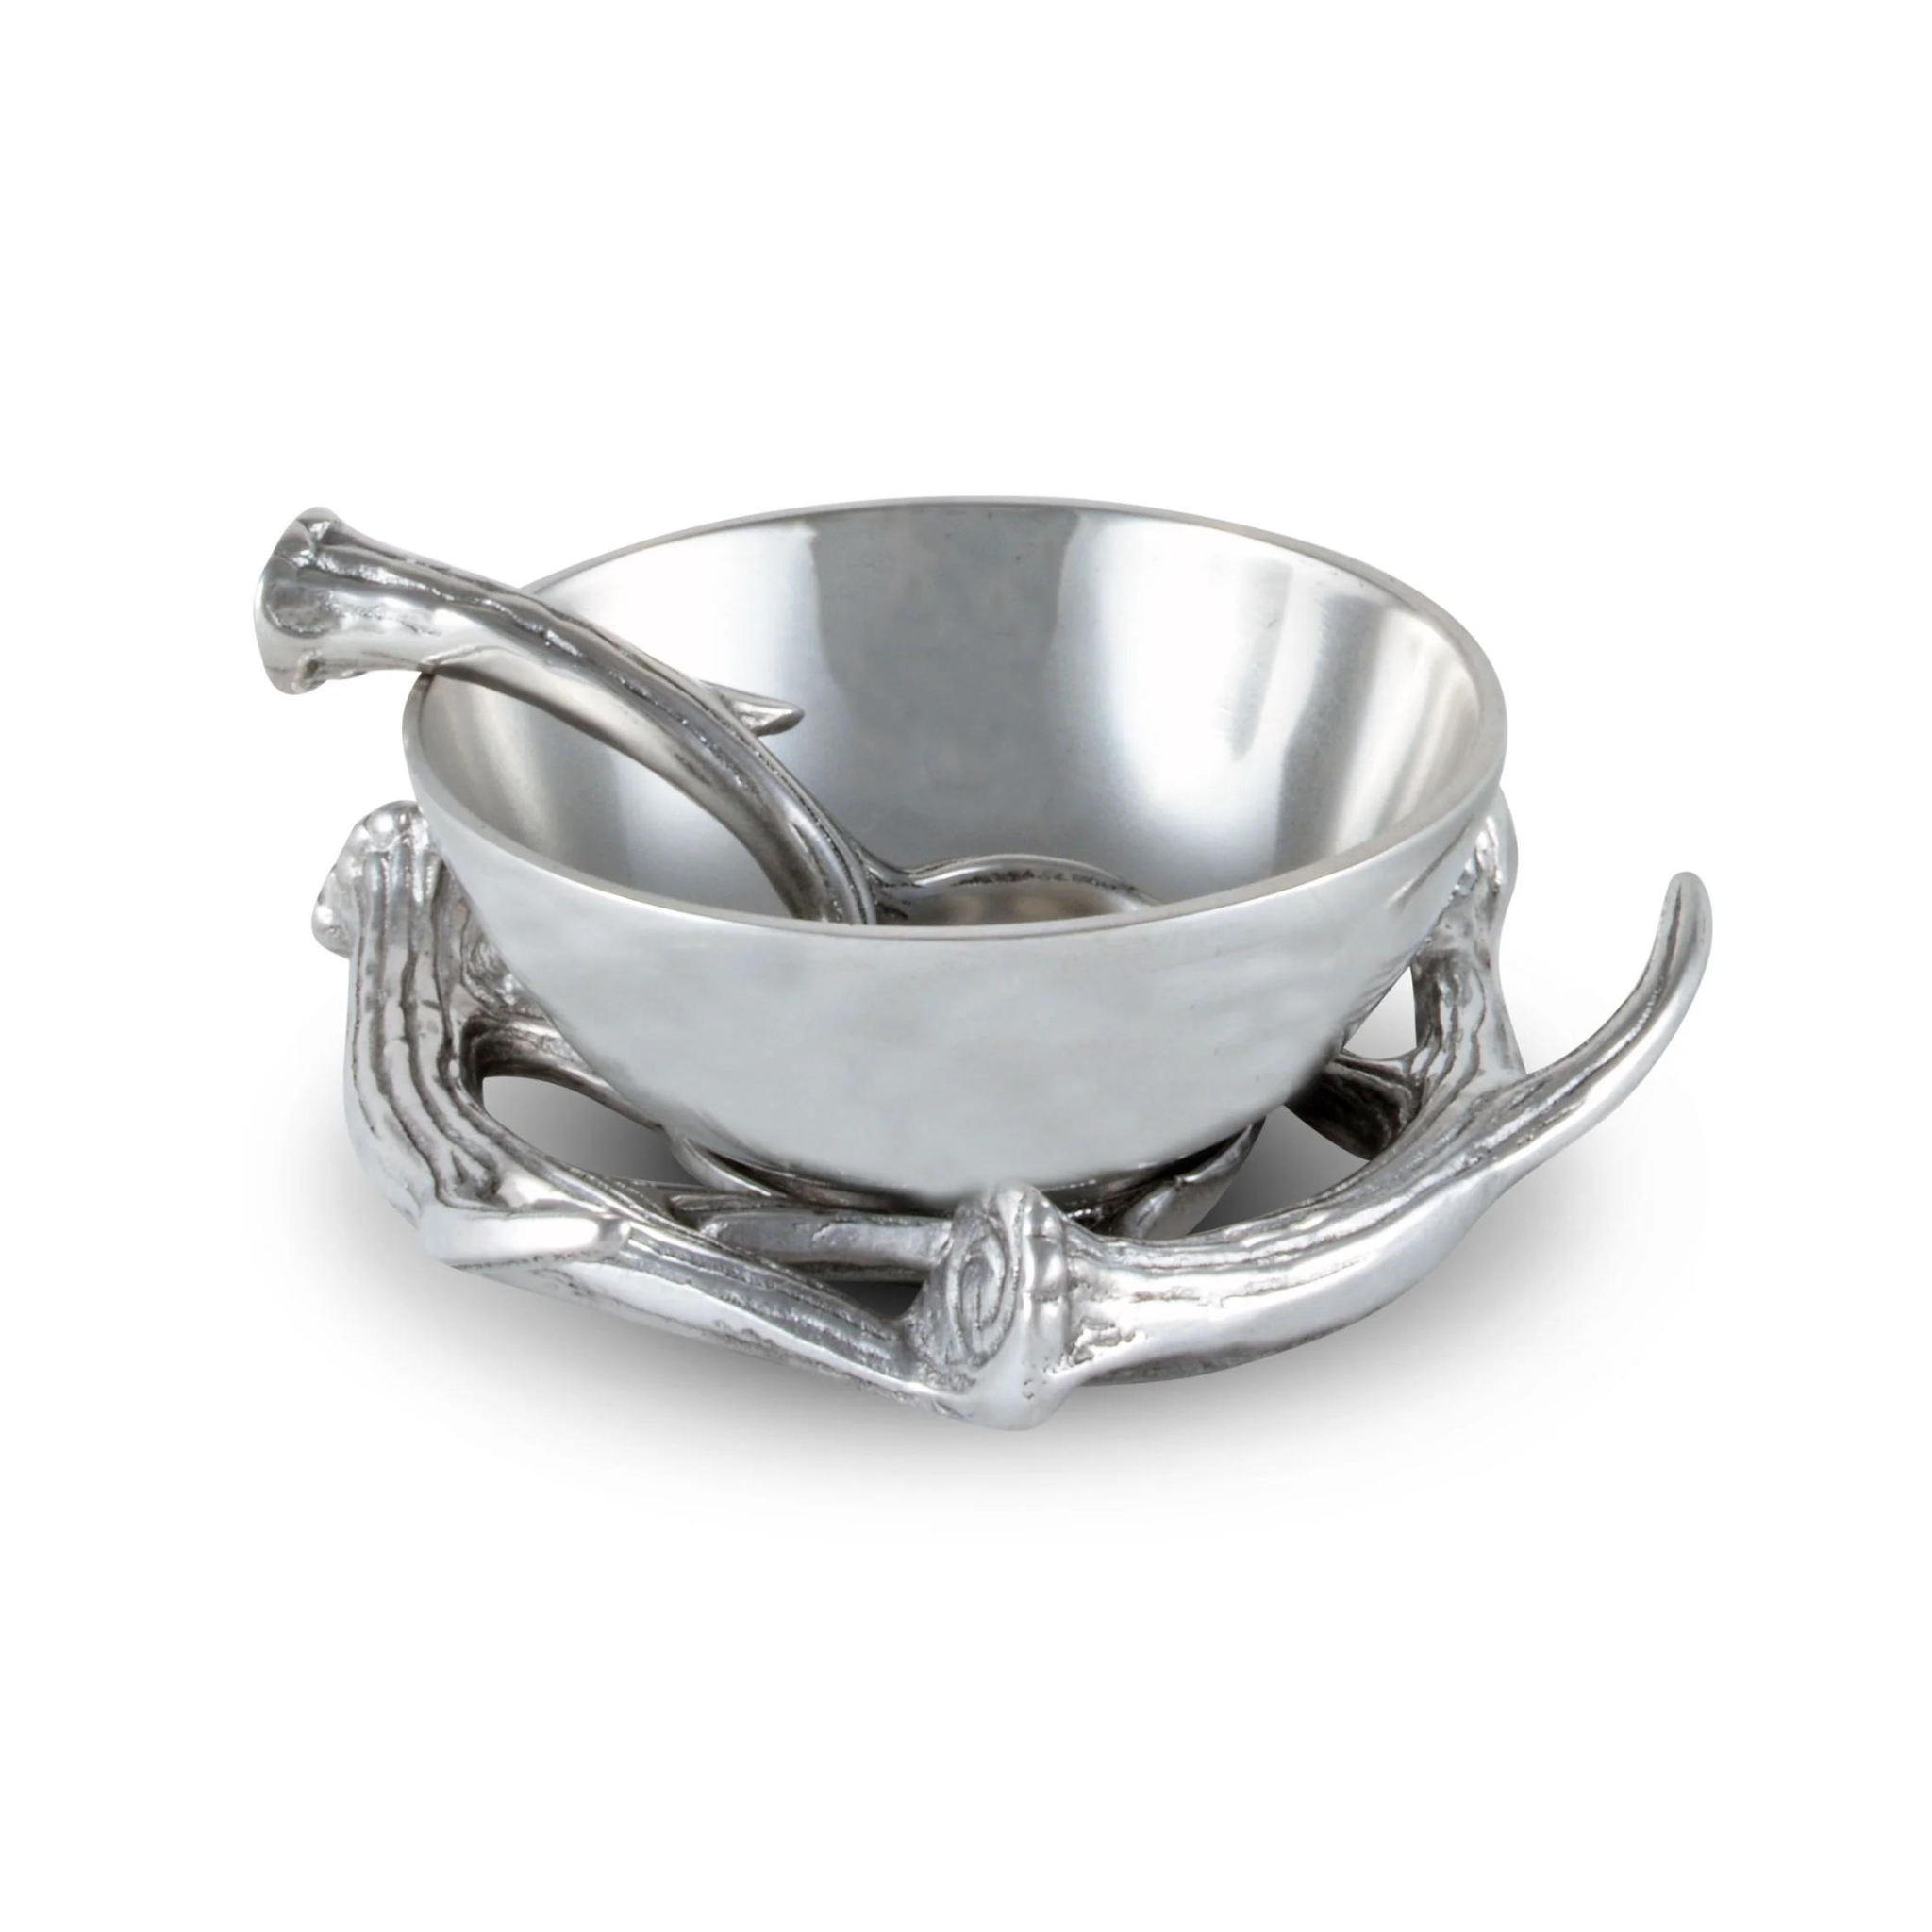 an aluminum serving bowl with antler base and spoon